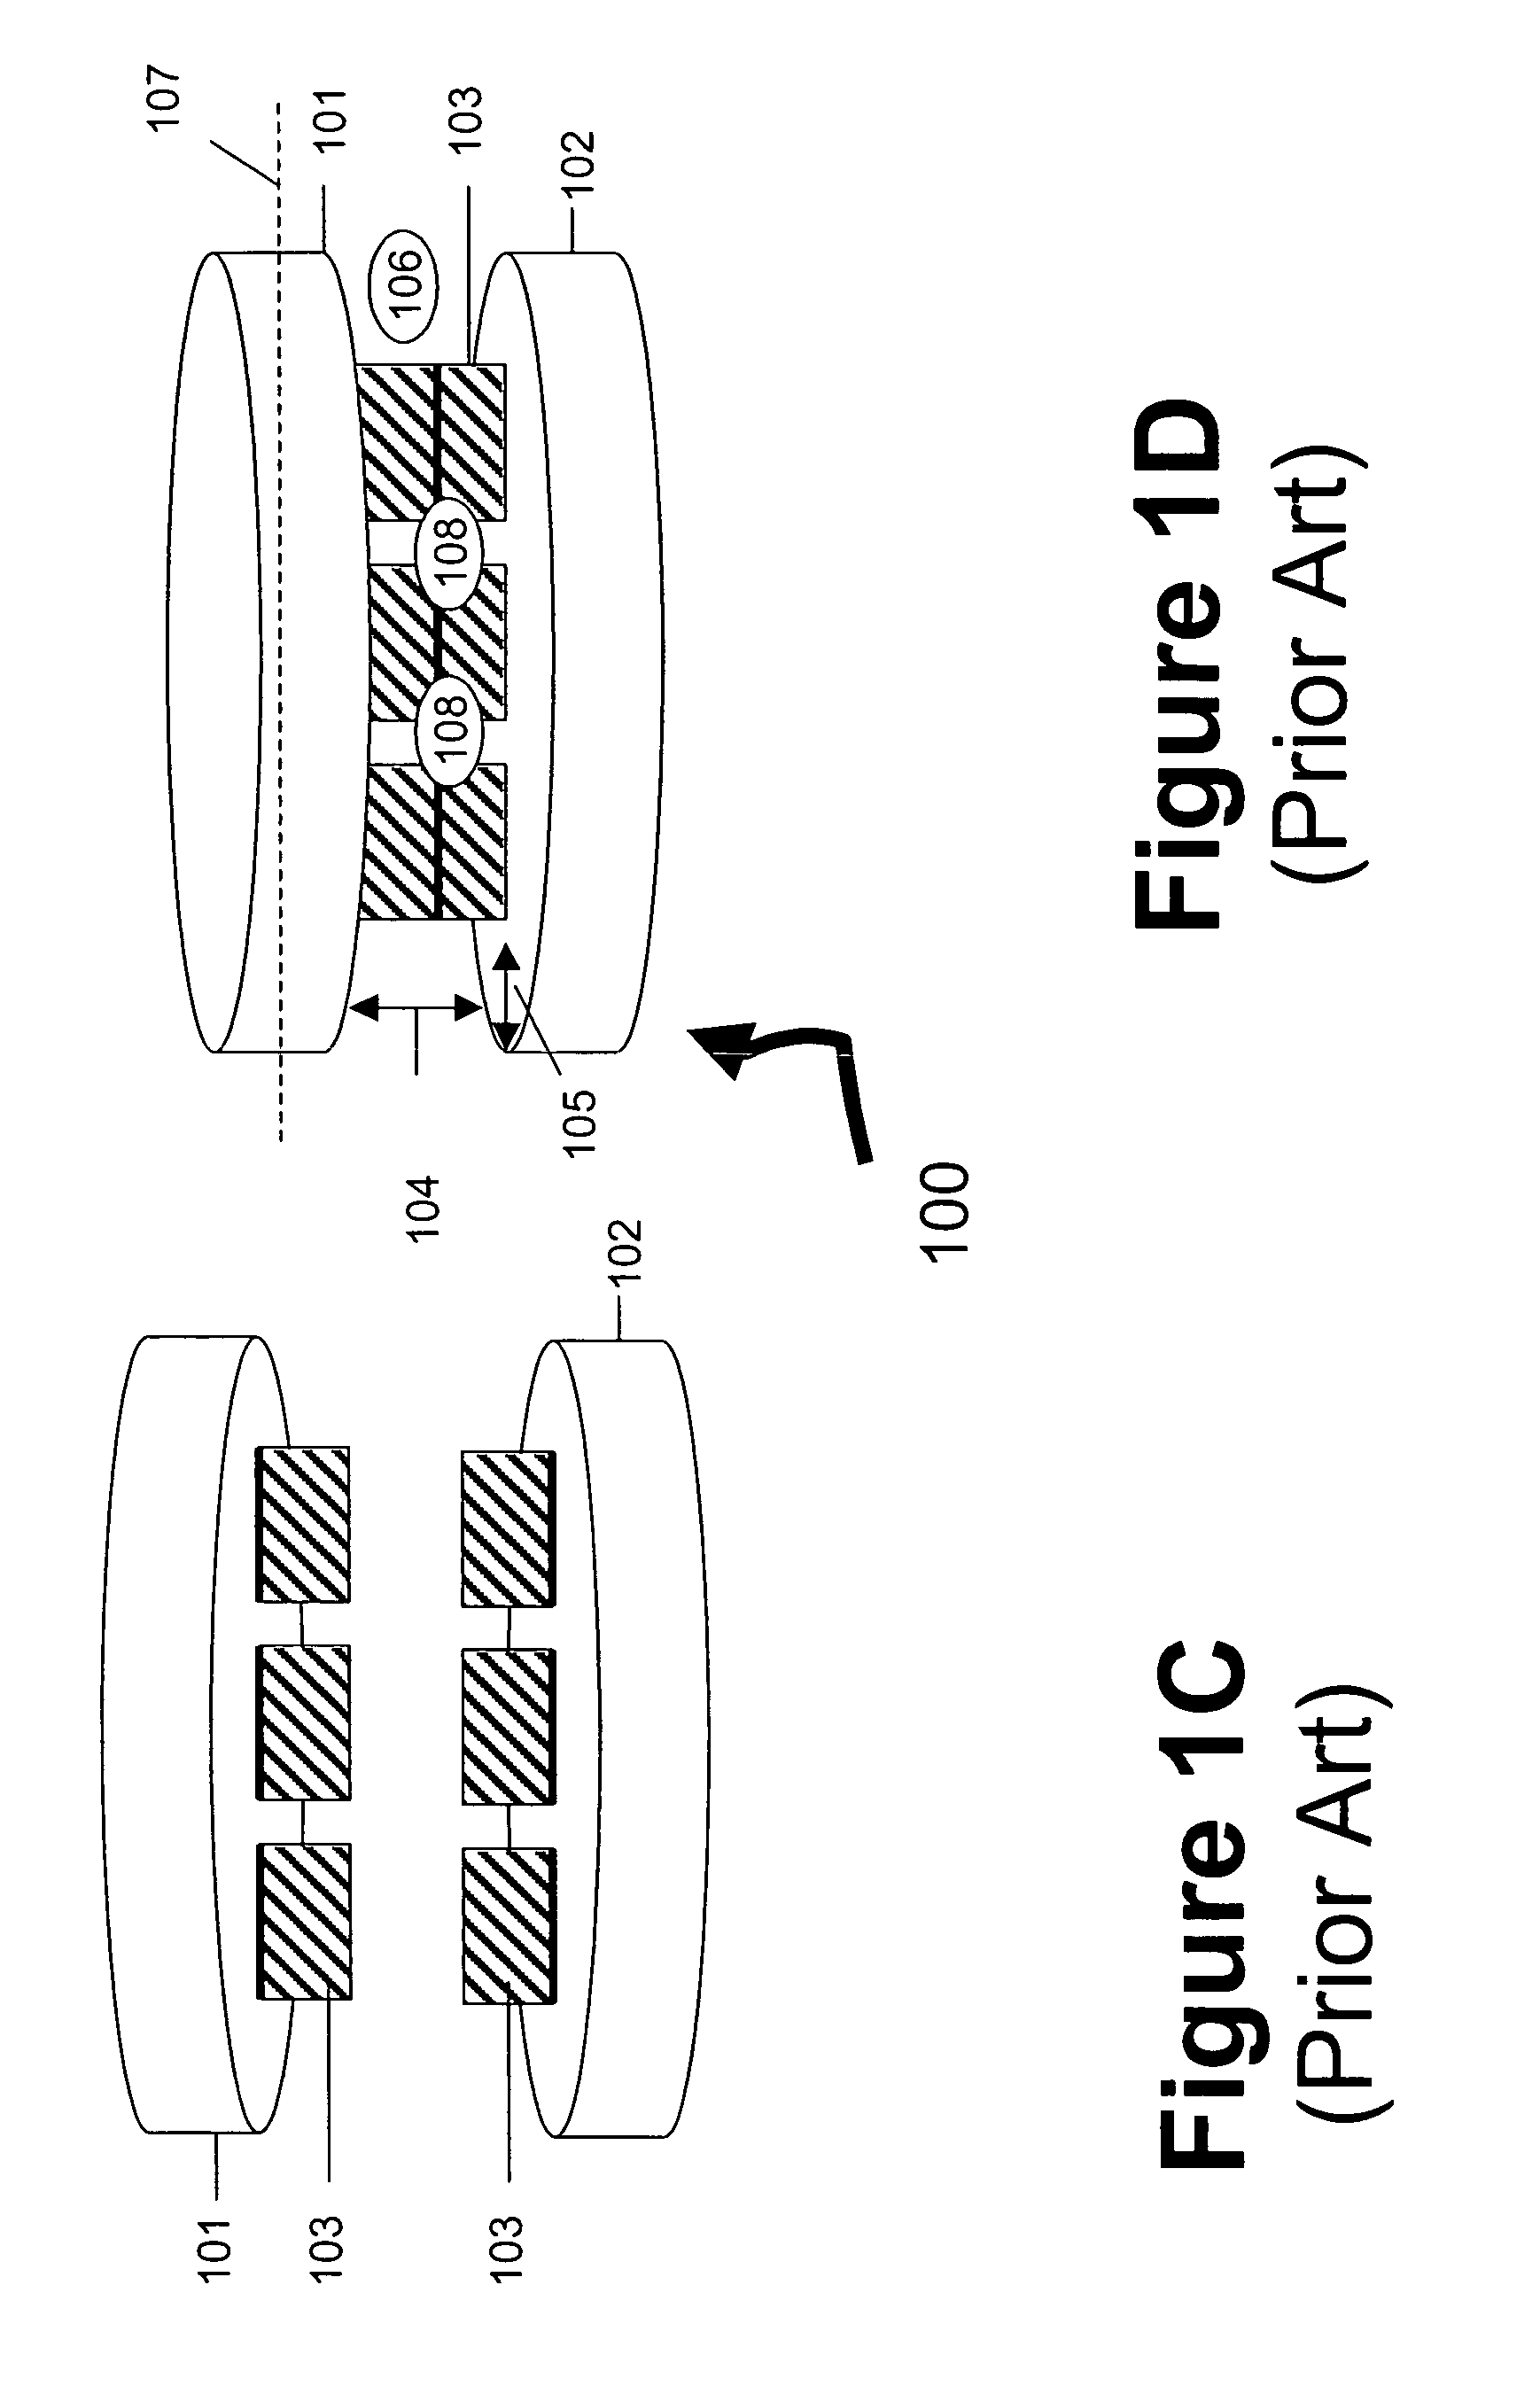 Method to fill the gap between coupled wafers